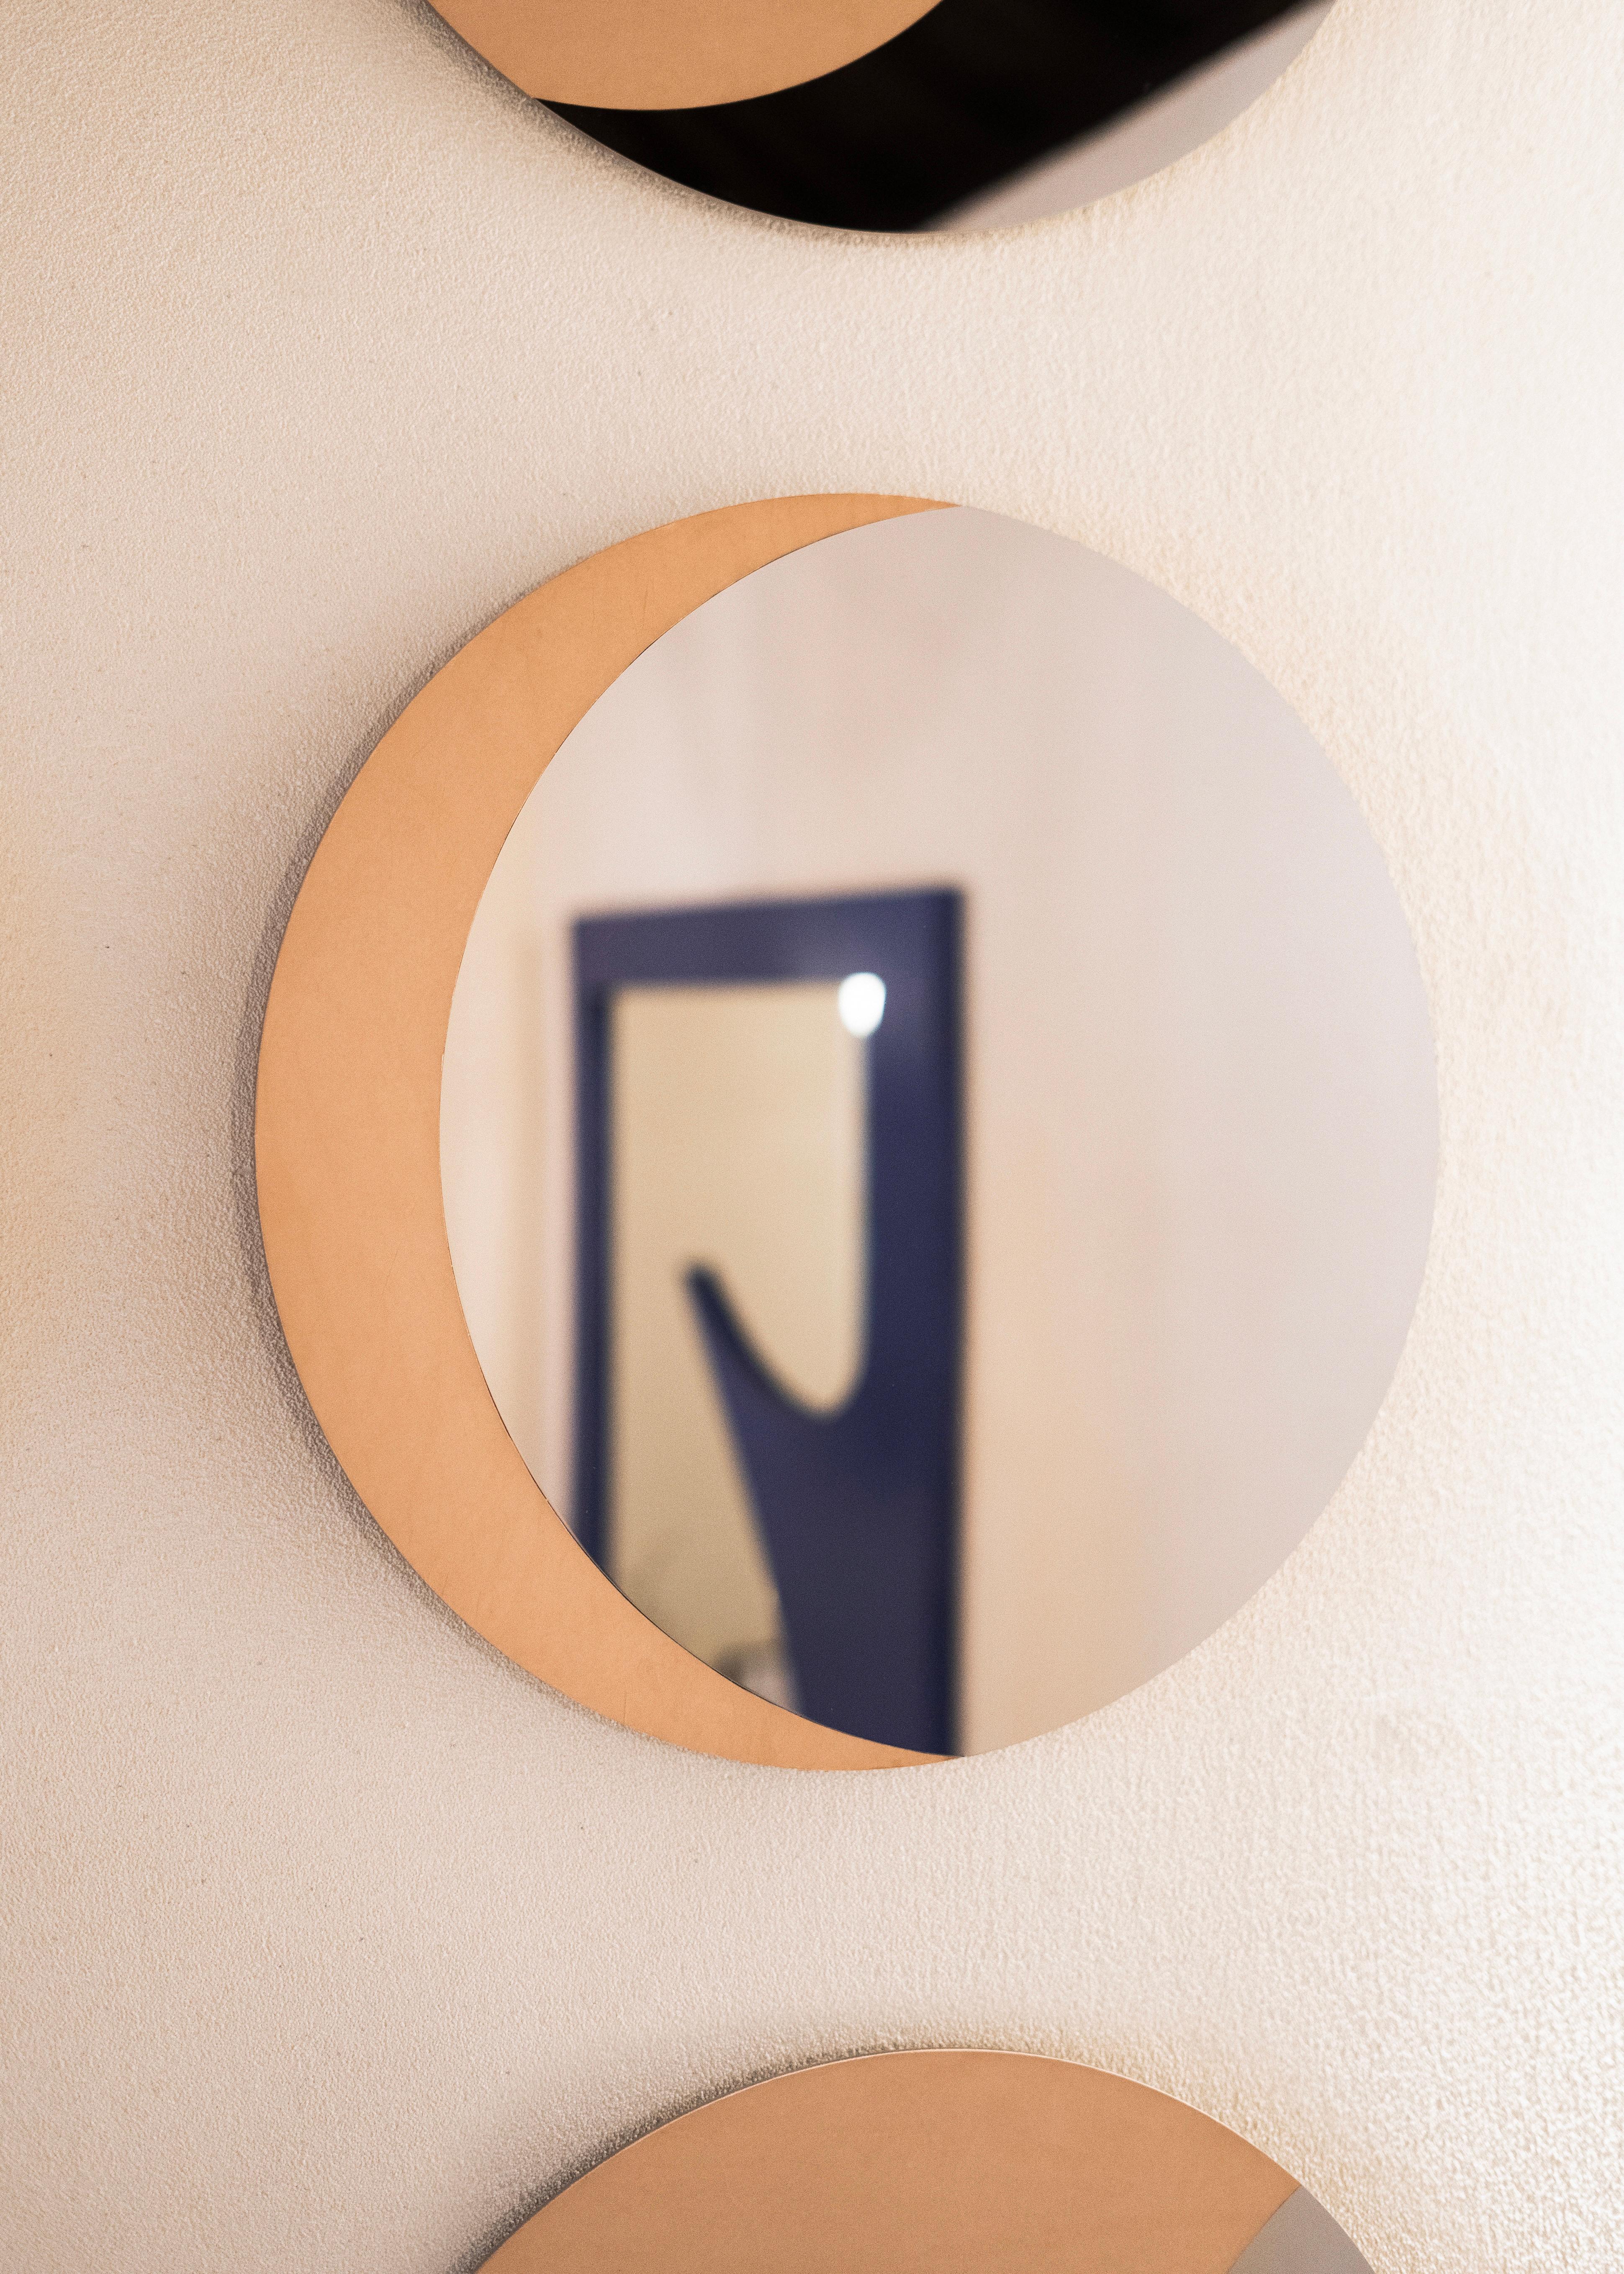 Contemporary Mirror in Vegan Leather and Stainless Steel  6